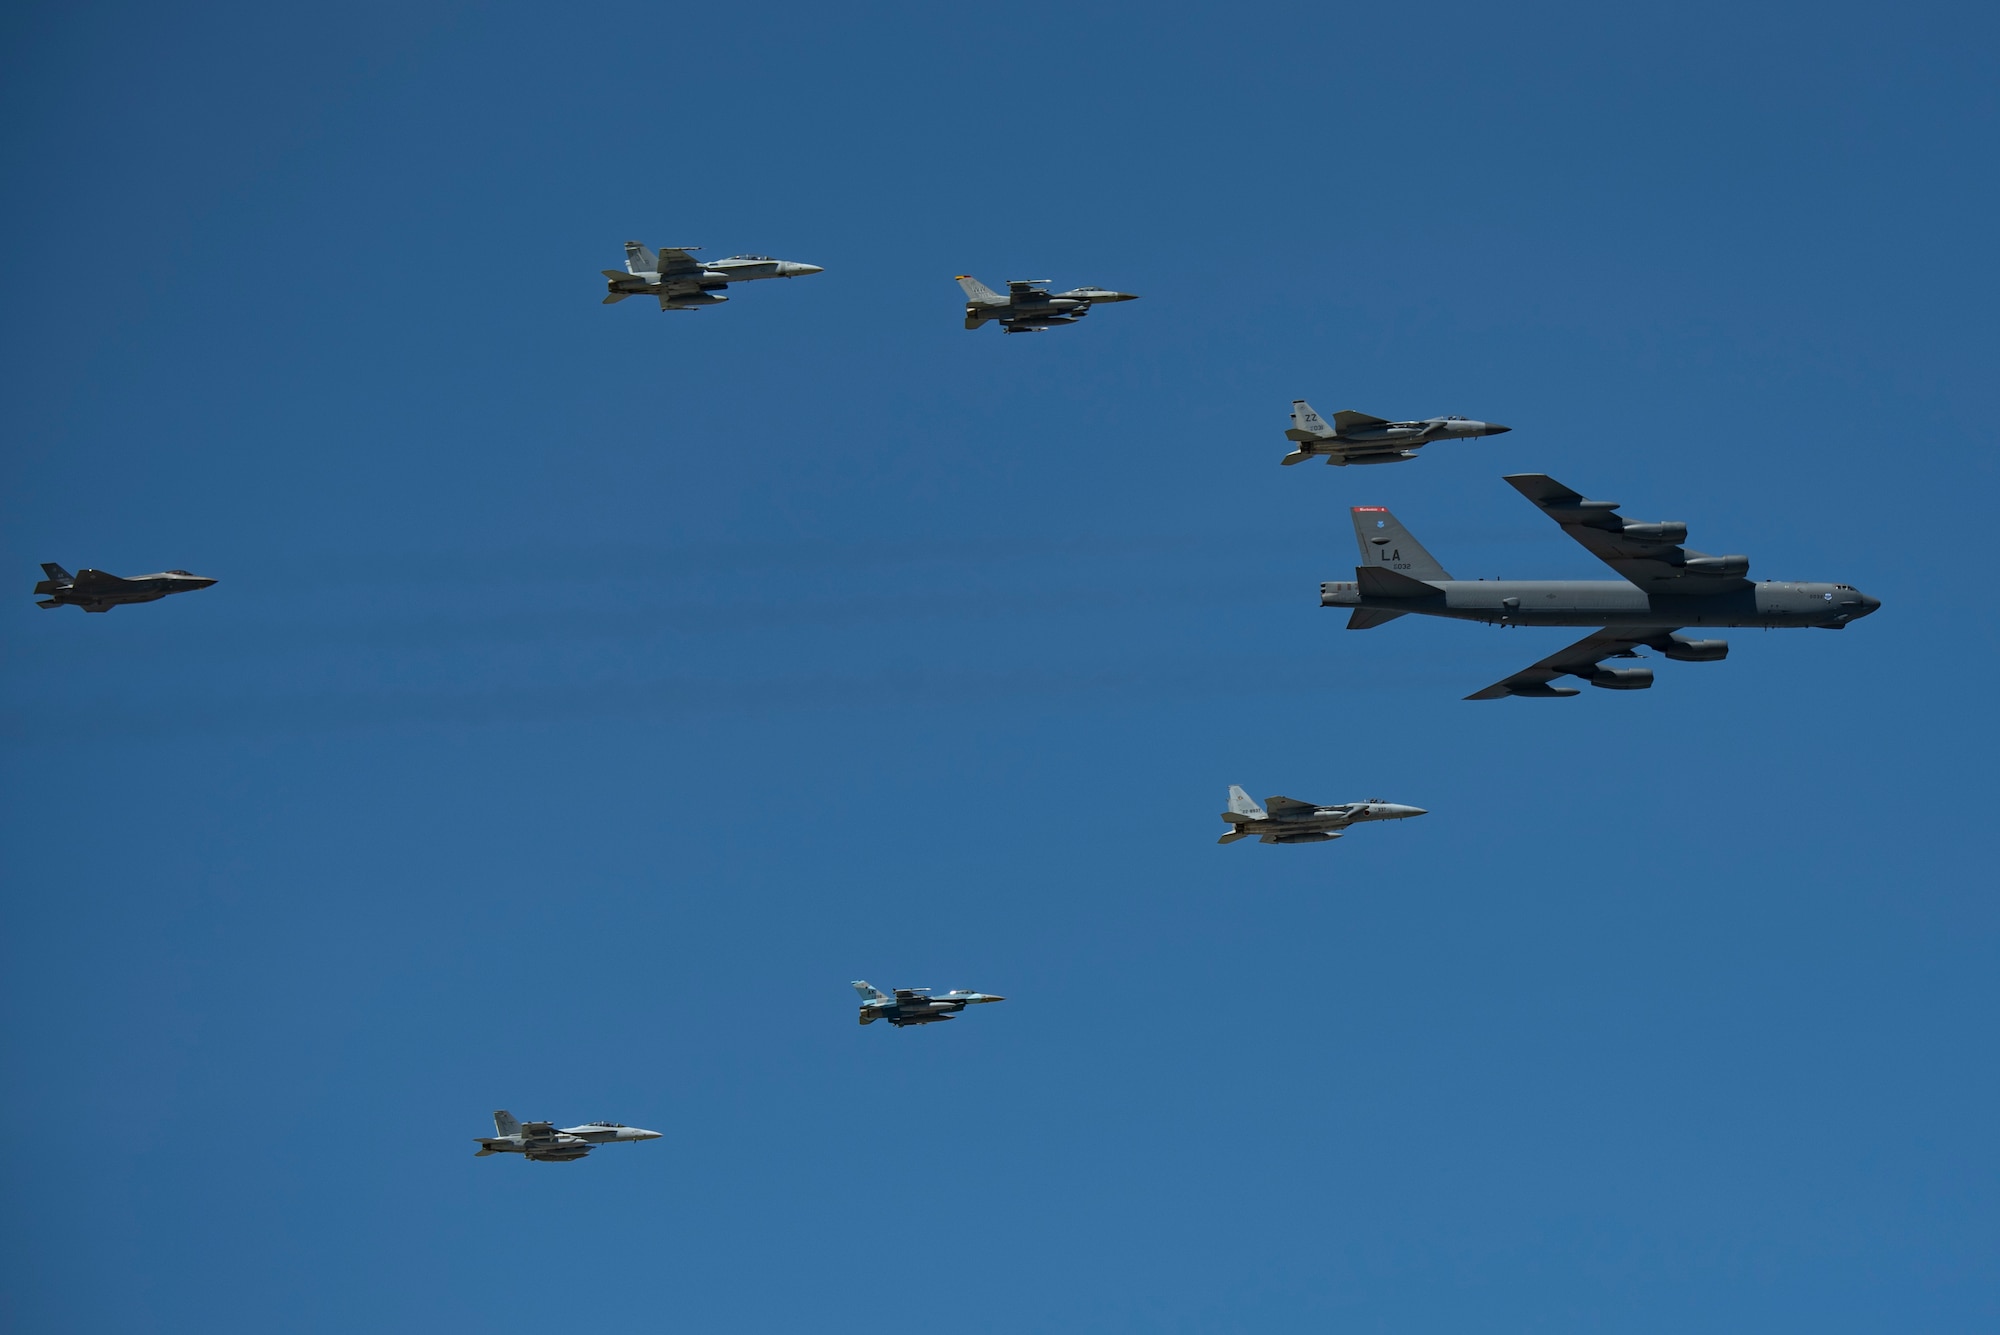 U.S. Air Force, Japan Air Self-Defense Force and Royal Australian Air Force aircraft fly in formation during exercise Cope North 21 at Andersen Air Force Base, Guam, Feb. 9, 2021.